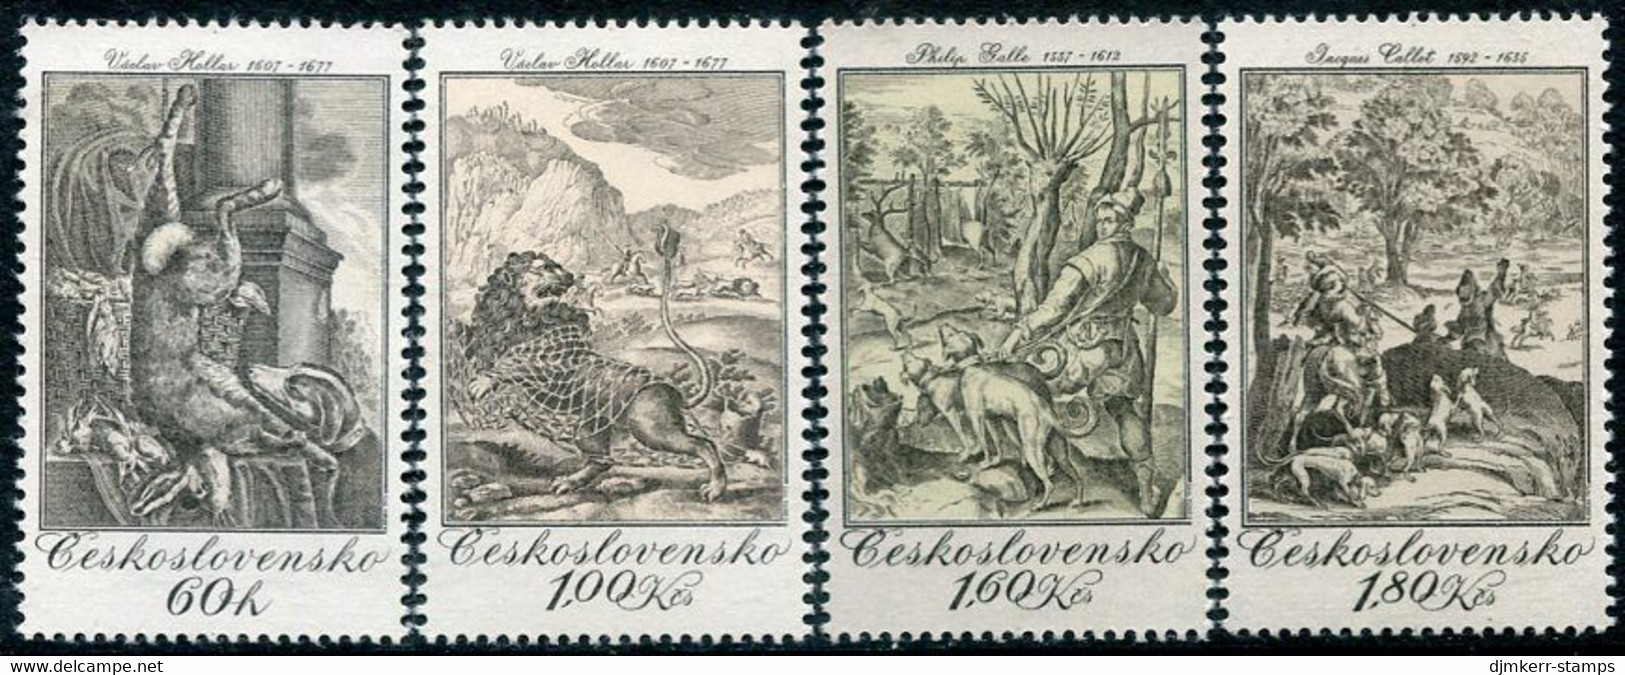 CZECHOSLOVAKIA 1975 Engravings With Hunting Scenes MNH / **. Michel 2240-43 - Nuovi